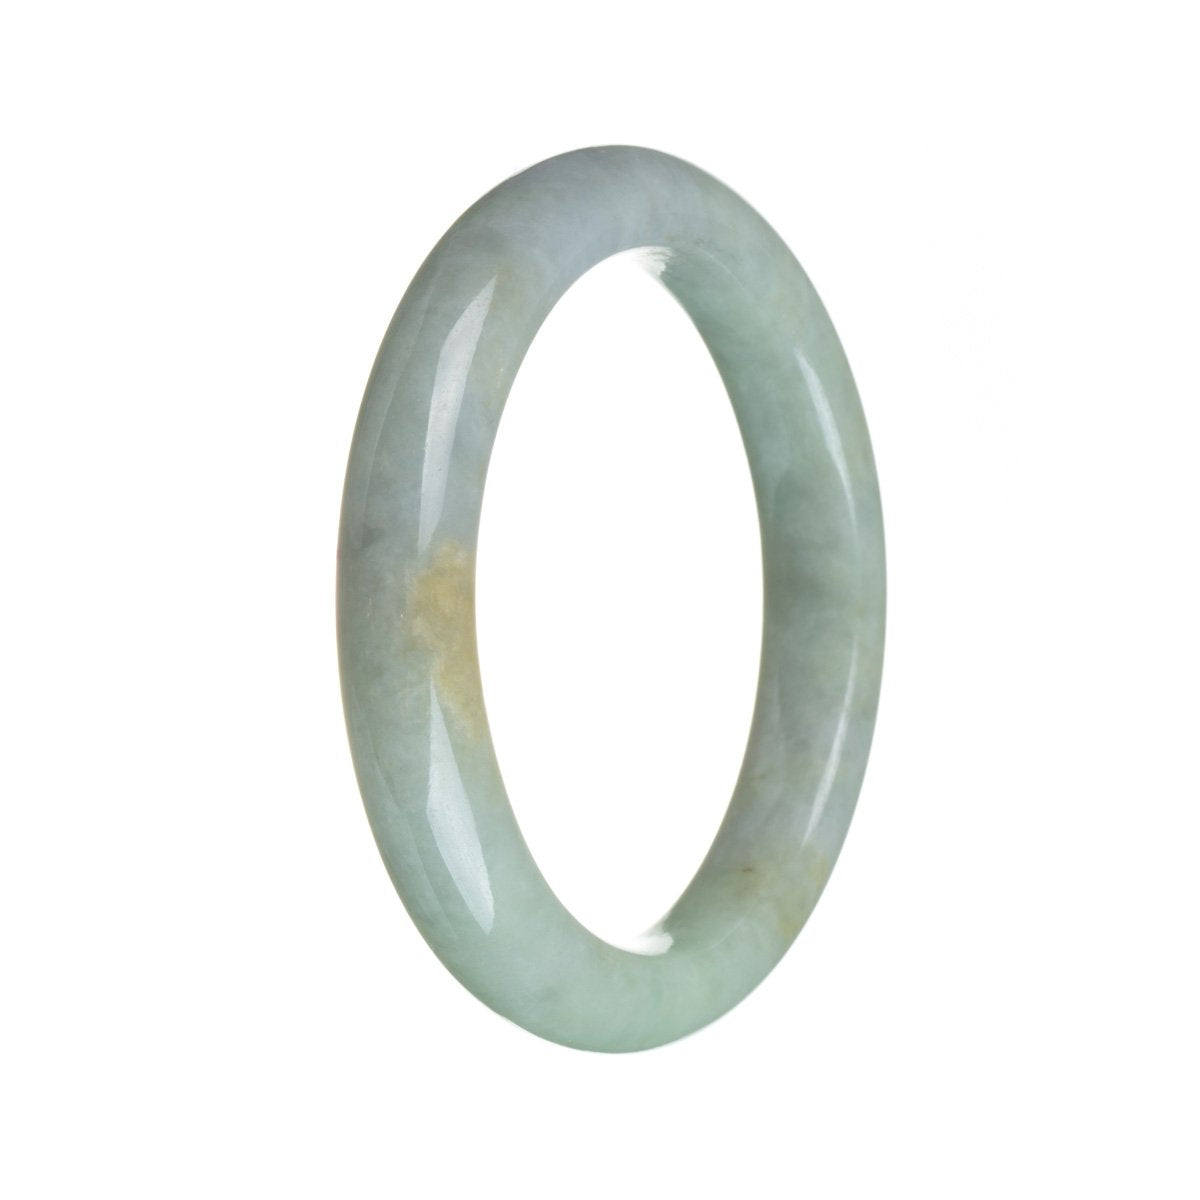 A genuine Grade A pale green and lavender Burma Jade bangle, measuring 57mm in a semi-round shape, offered by MAYS GEMS.